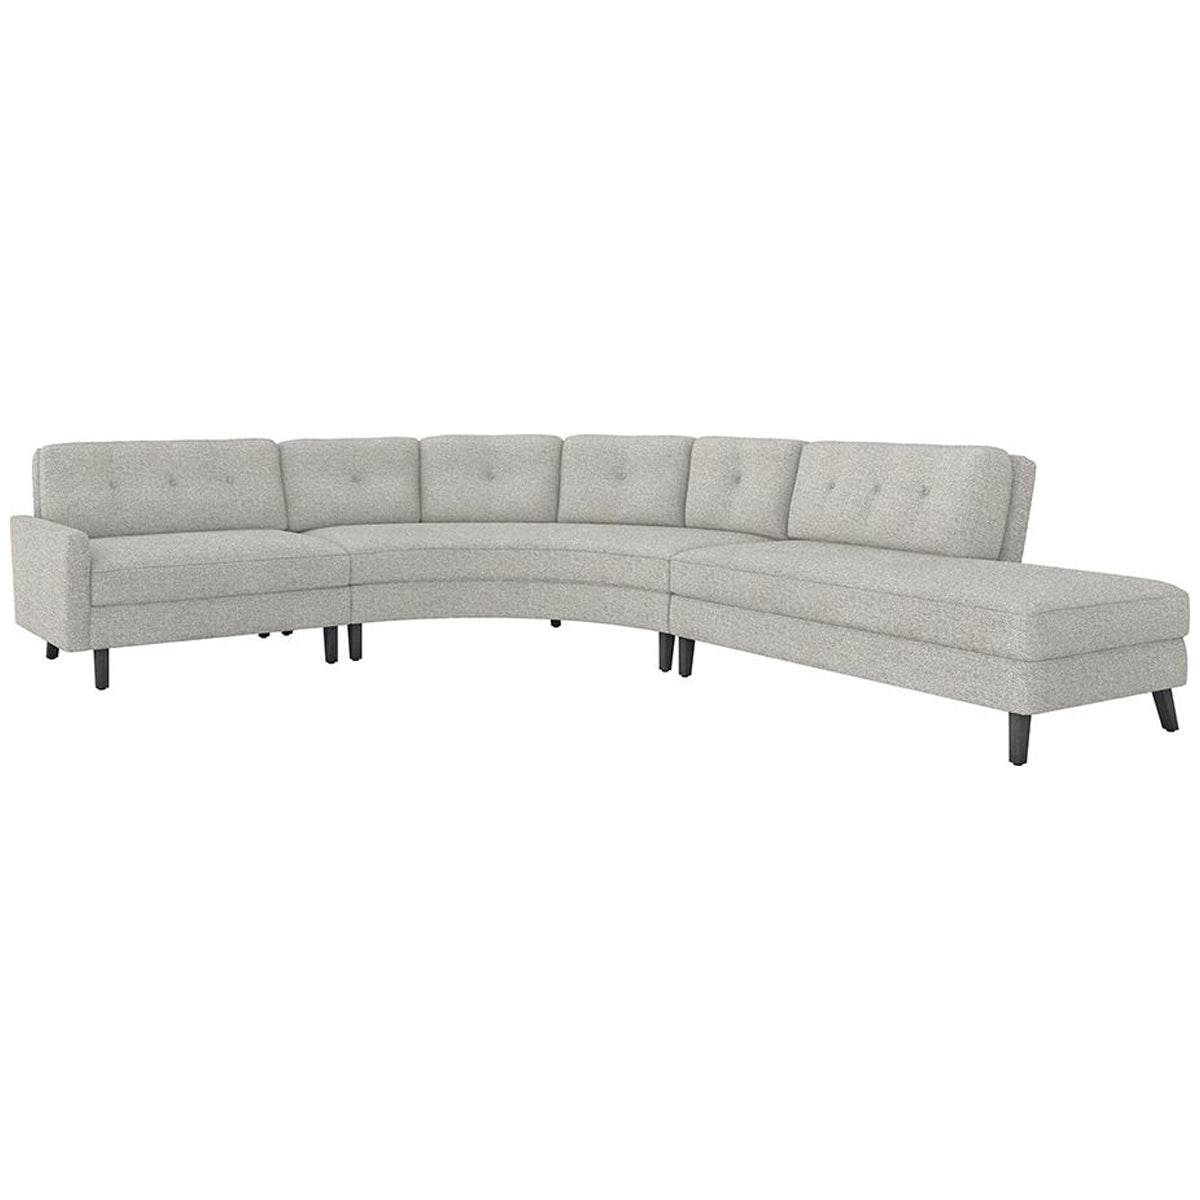 Interlude Home Aventura 3-Piece Sectional - Loma Weave